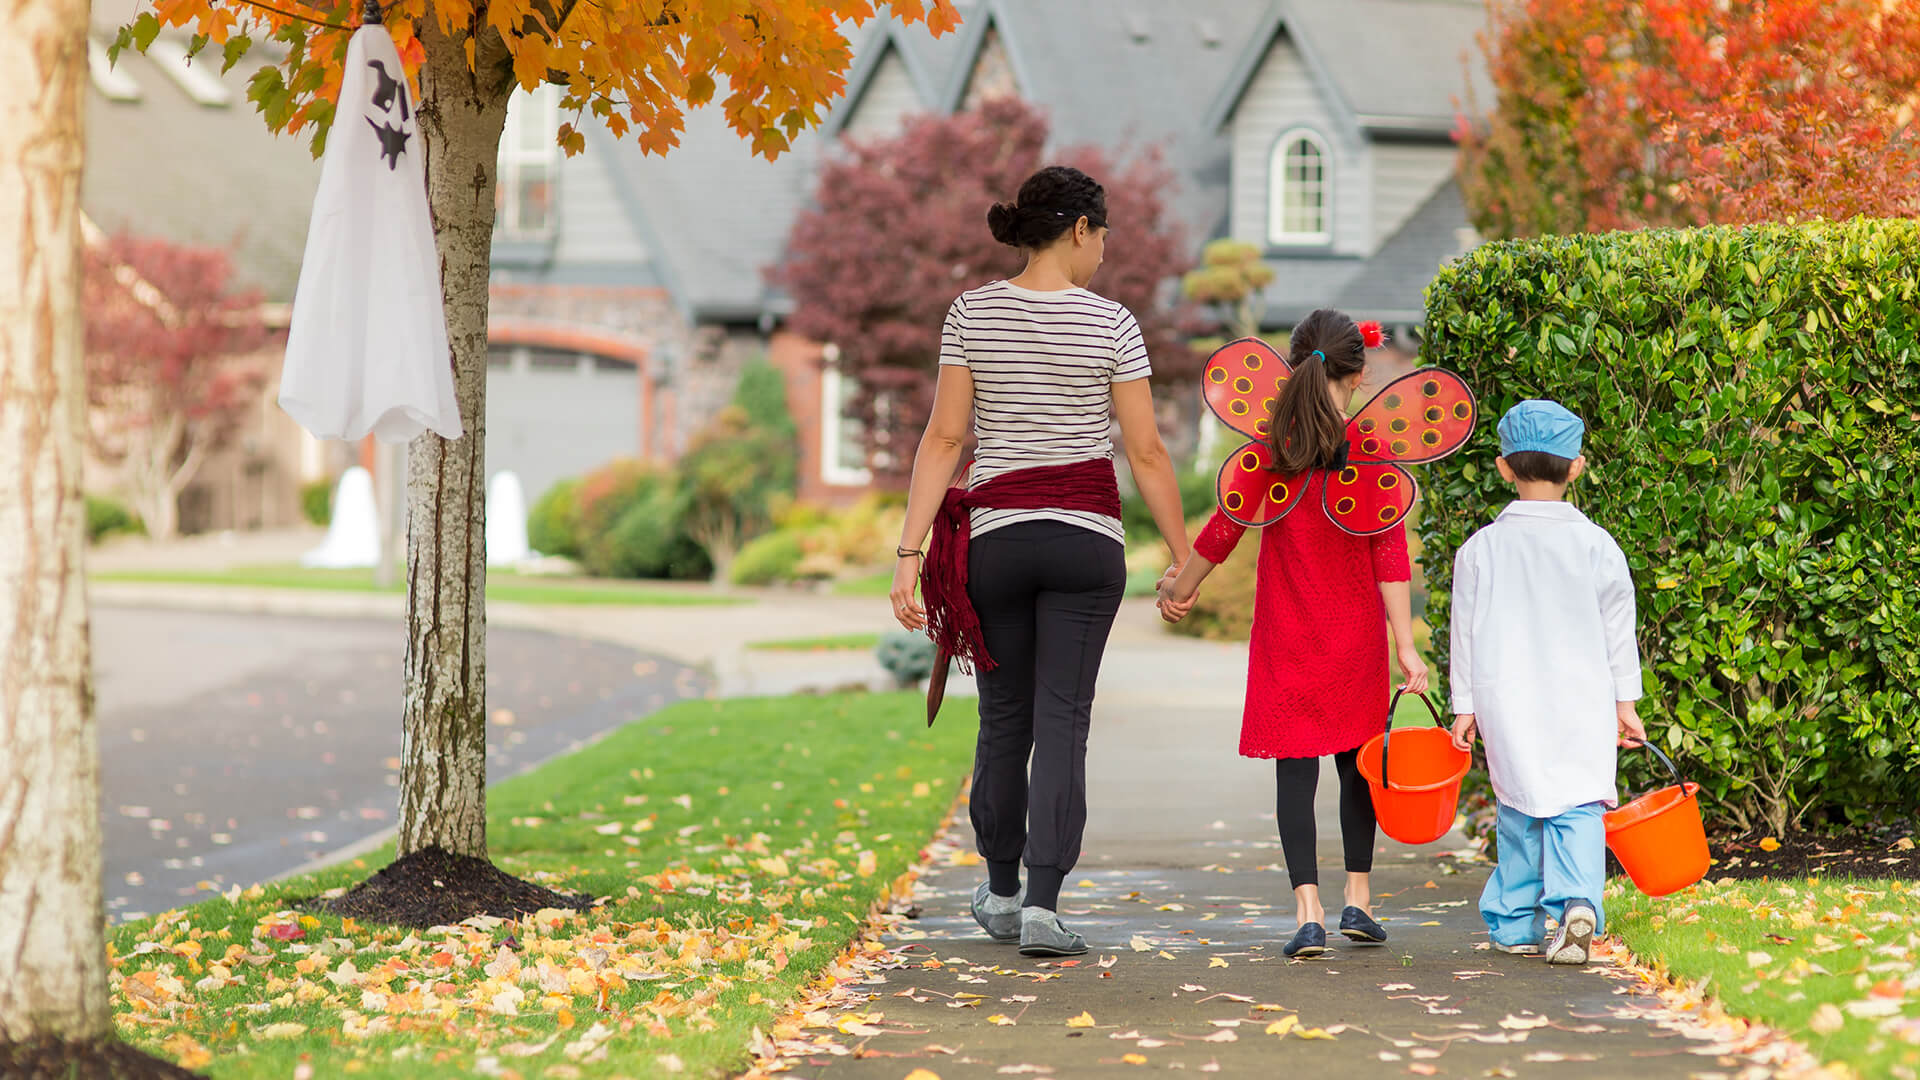 Halloween Safety Tips for Parents